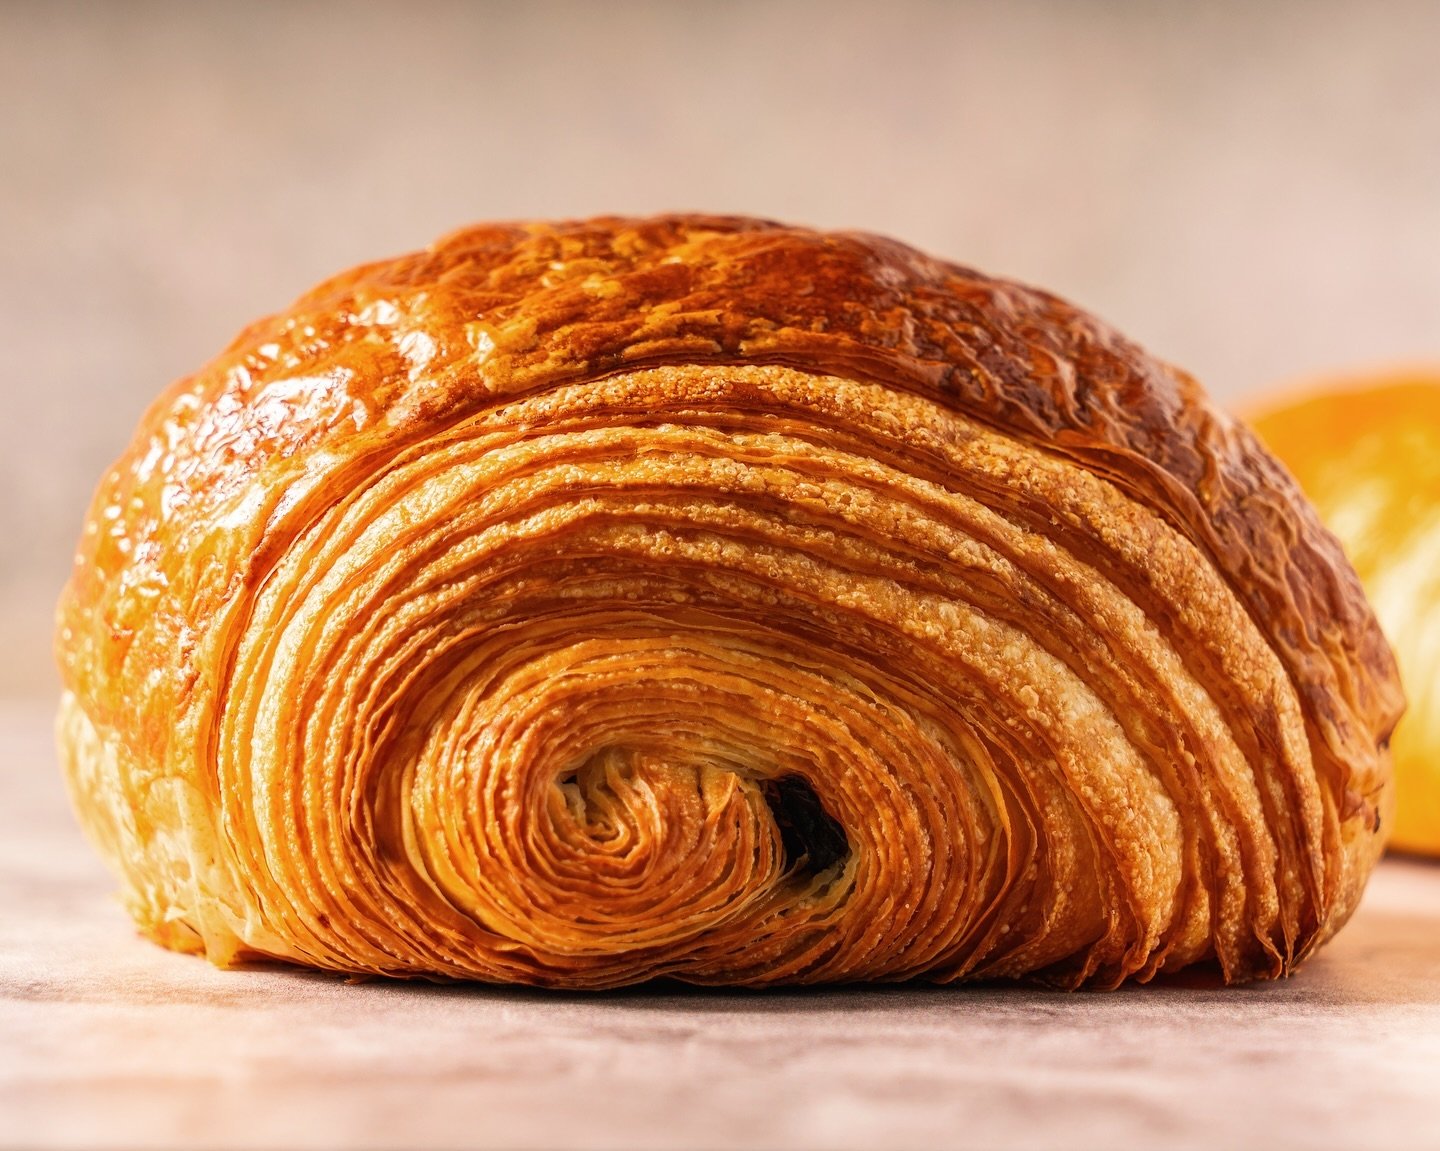 👏 PAIN AU CHOCOLATE 🍫

Who needs a boyfriend when you have our Pain Au Chocolate Croissant? 👩&zwj;❤️&zwj;💋&zwj;👨

&bull; WARM &bull; FLAKY &bull; BUTTERY &bull; CHOCOLATE &bull;

And it won&rsquo;t leave you with commitment issues. 🫣❤️
&bull;
&